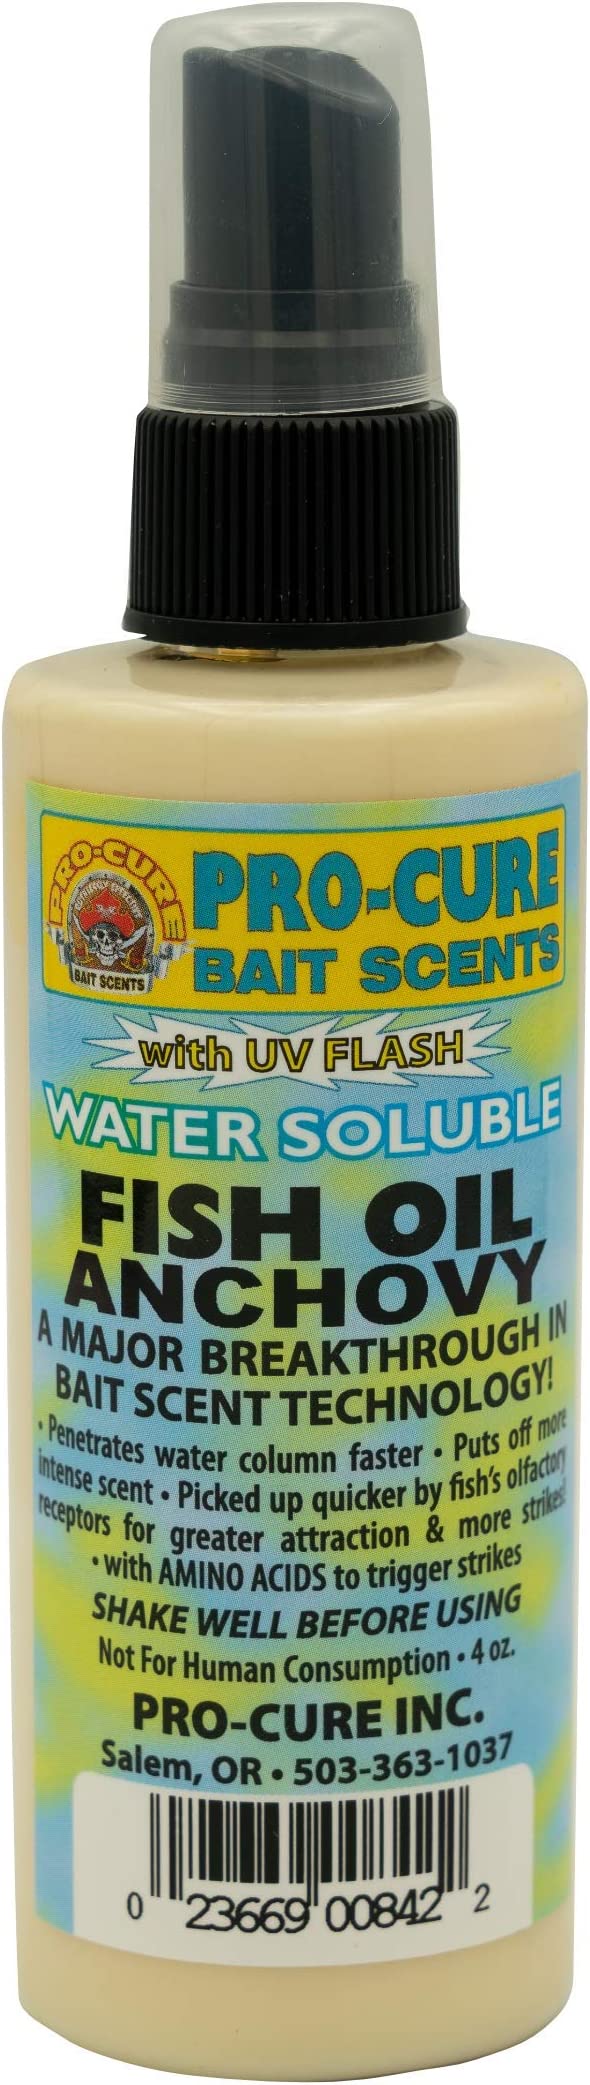 Pro-Cure Bait Scents WS-ANC Anchovy Water Soluble Fish Oil, 4-Ounce